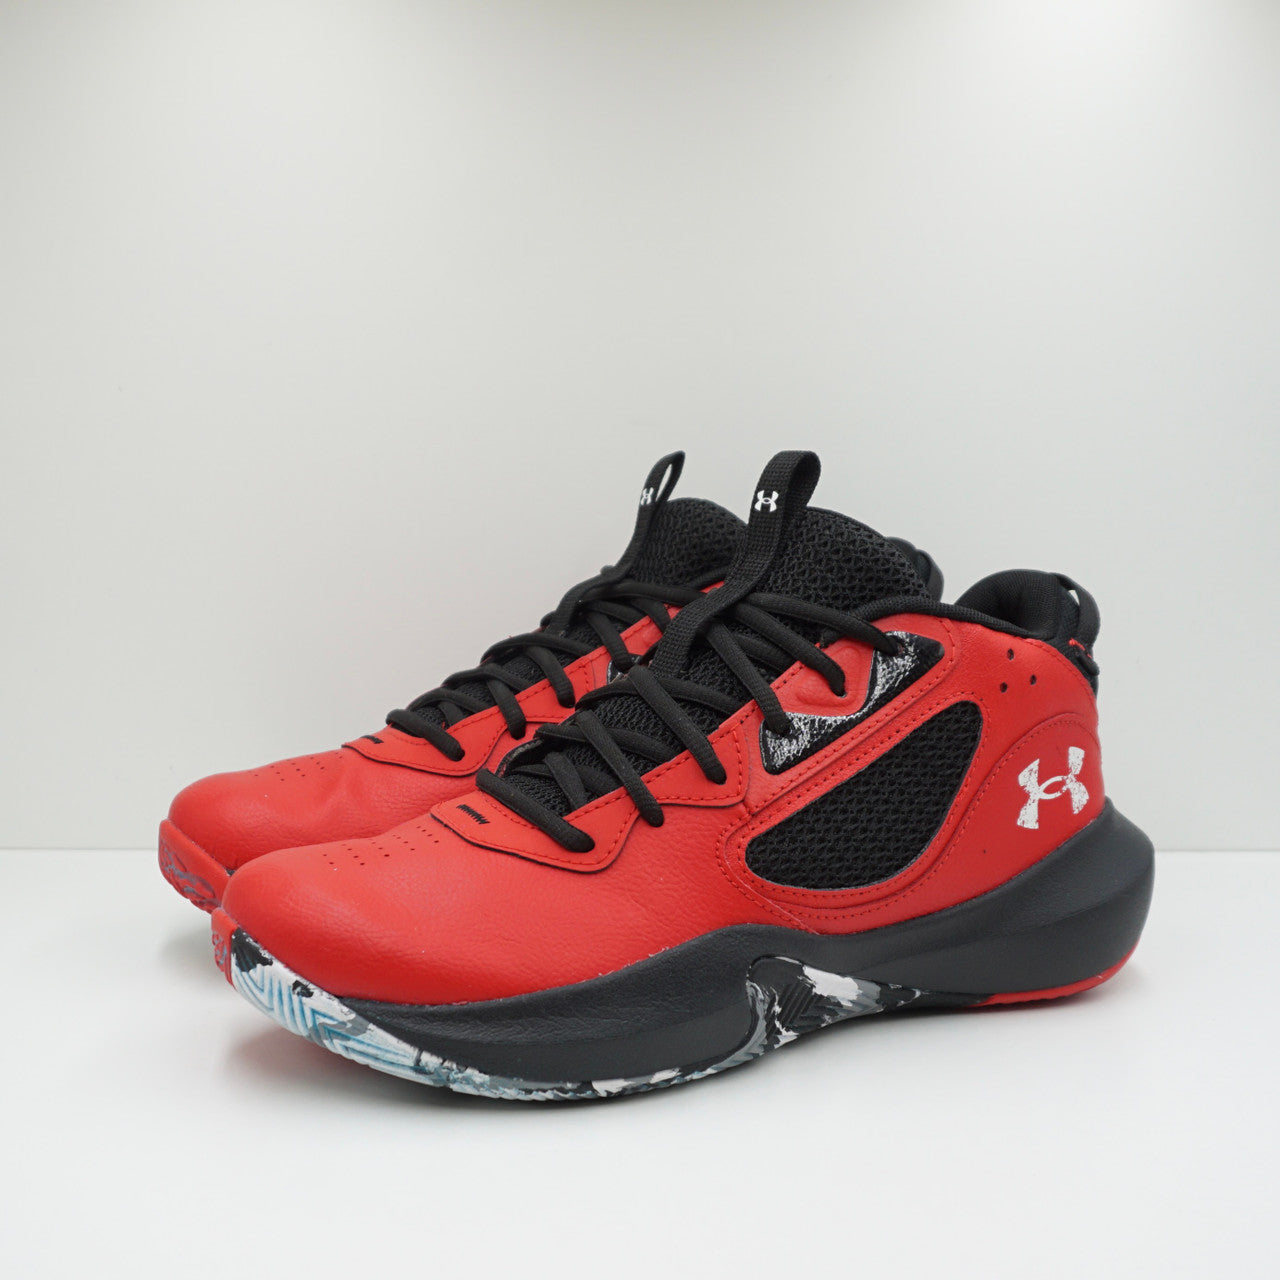 Under Armour Lockdown 6 Basketball Red